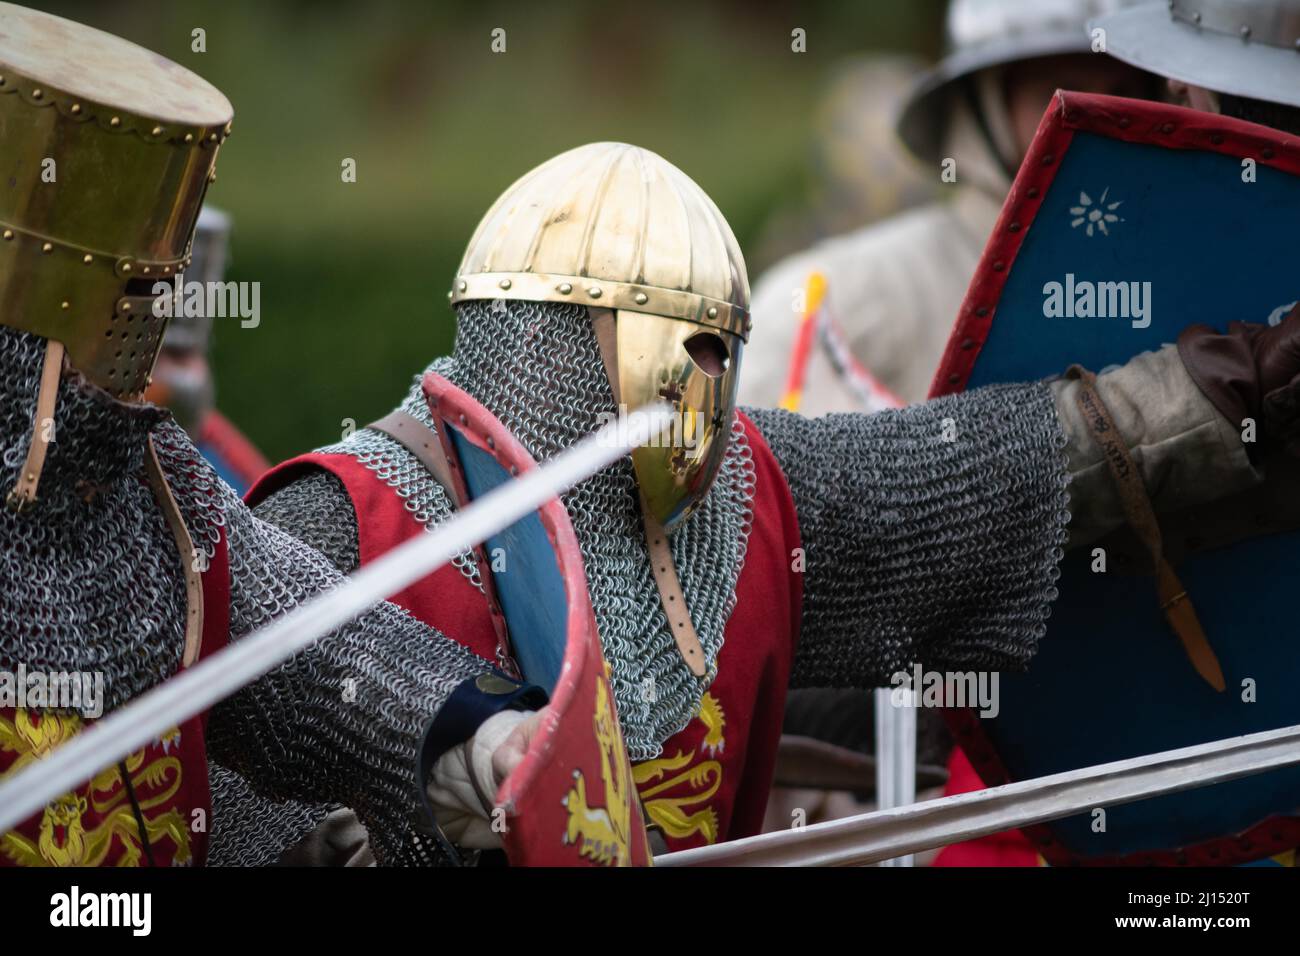 Evesham, Worcestershire, UK. 7th August, 2021. Pictured: Re-enactors practice fighting techniques after a 2 year battle absence due to the Covid pande Stock Photo